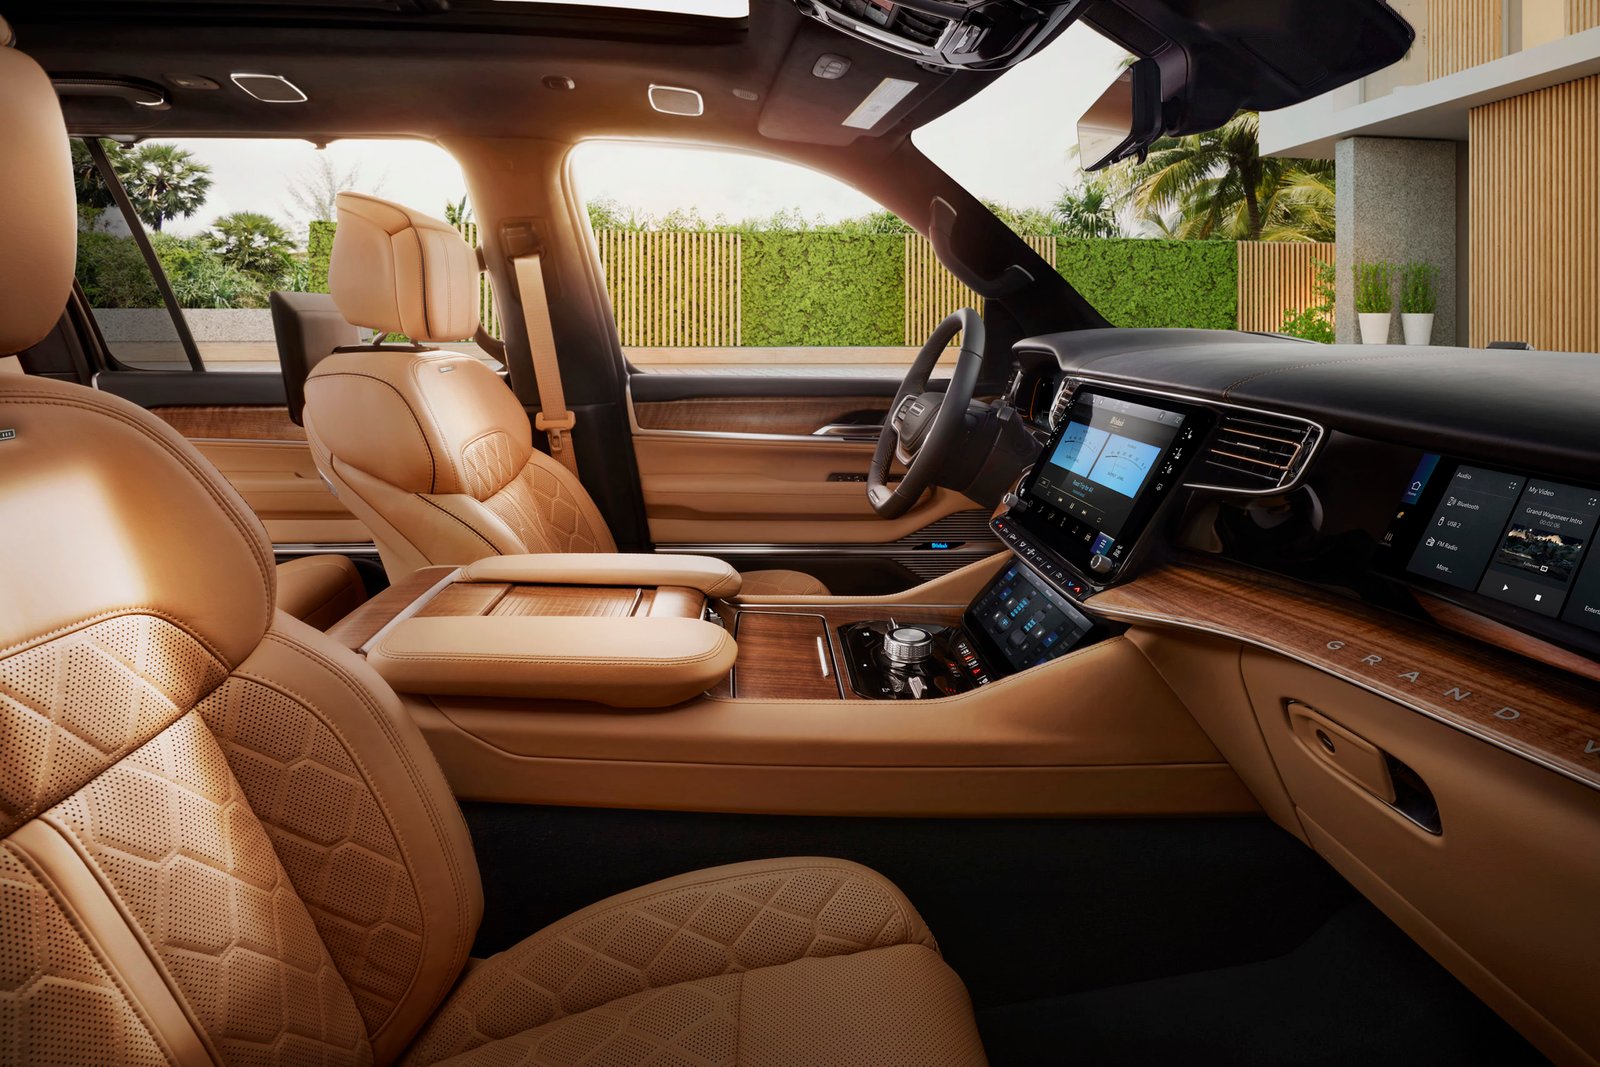 All-new 2022 Grand Wagoneer interior front row with Palermo leather seating with quilting and leather-wrapped instrument panel, consoles and door panels with accent stitching is available.